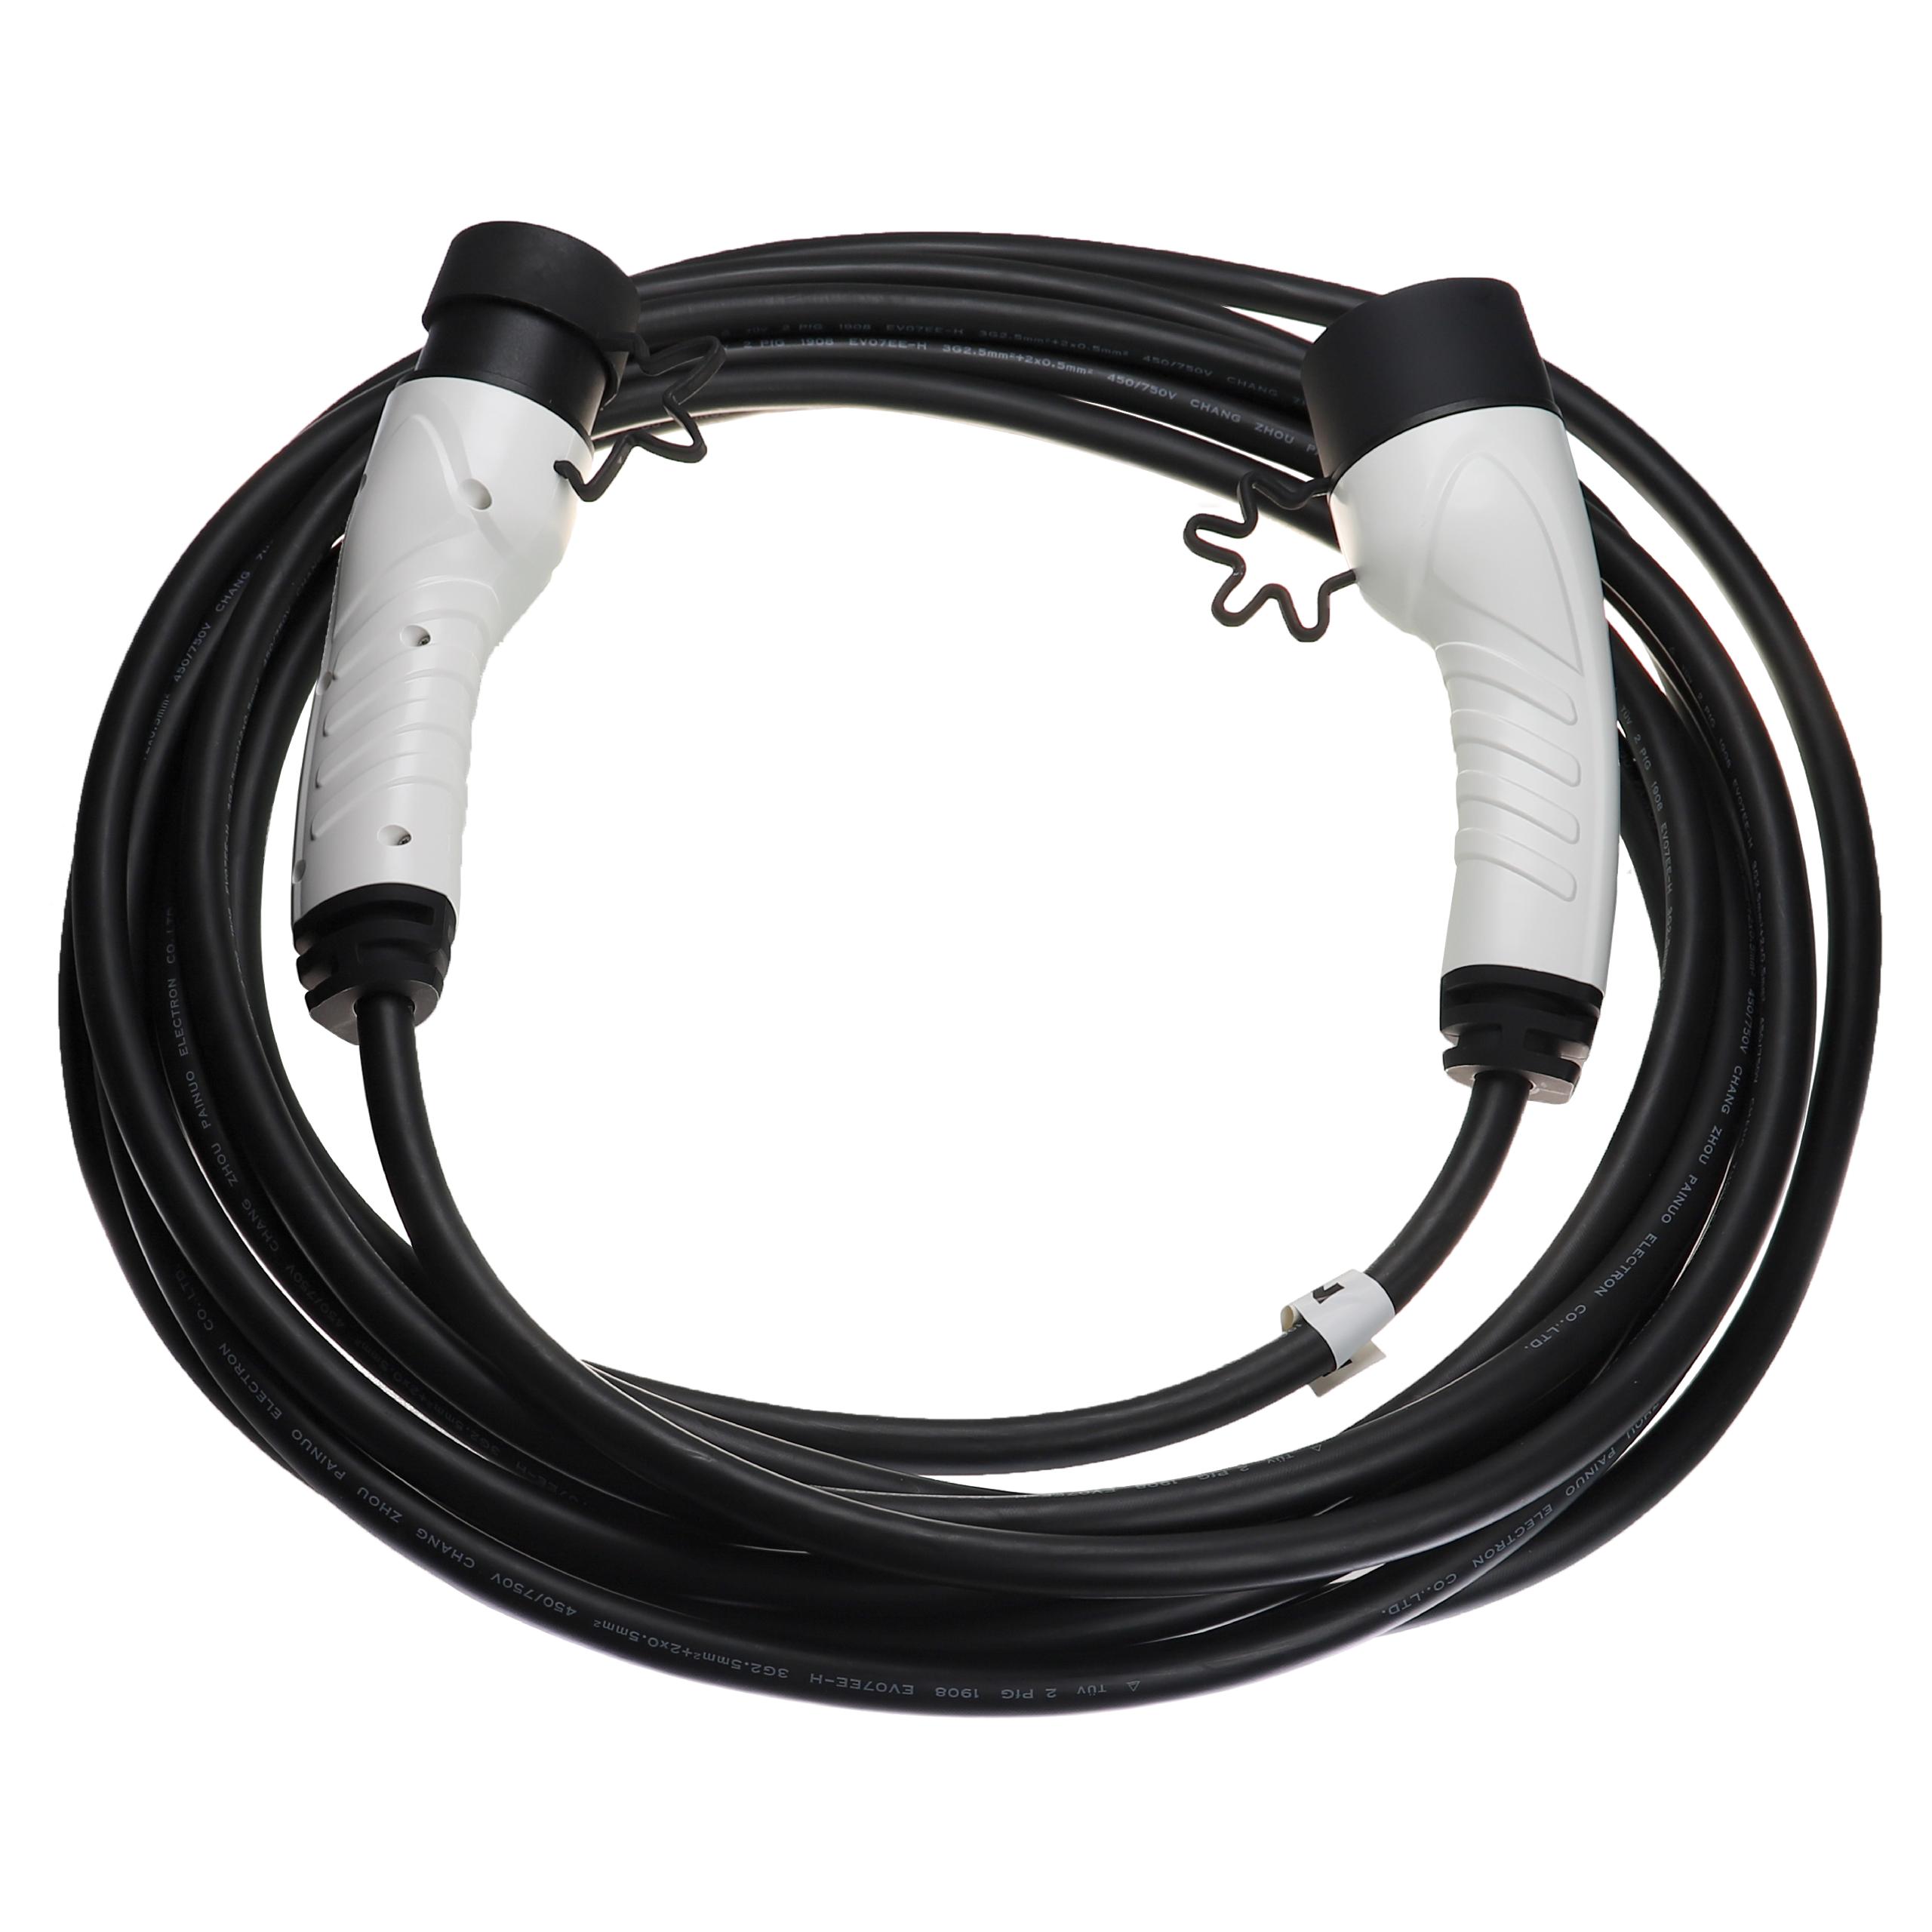 Charging cable 7m, 3.5kW for Renault Megane Grandtour E-Tech